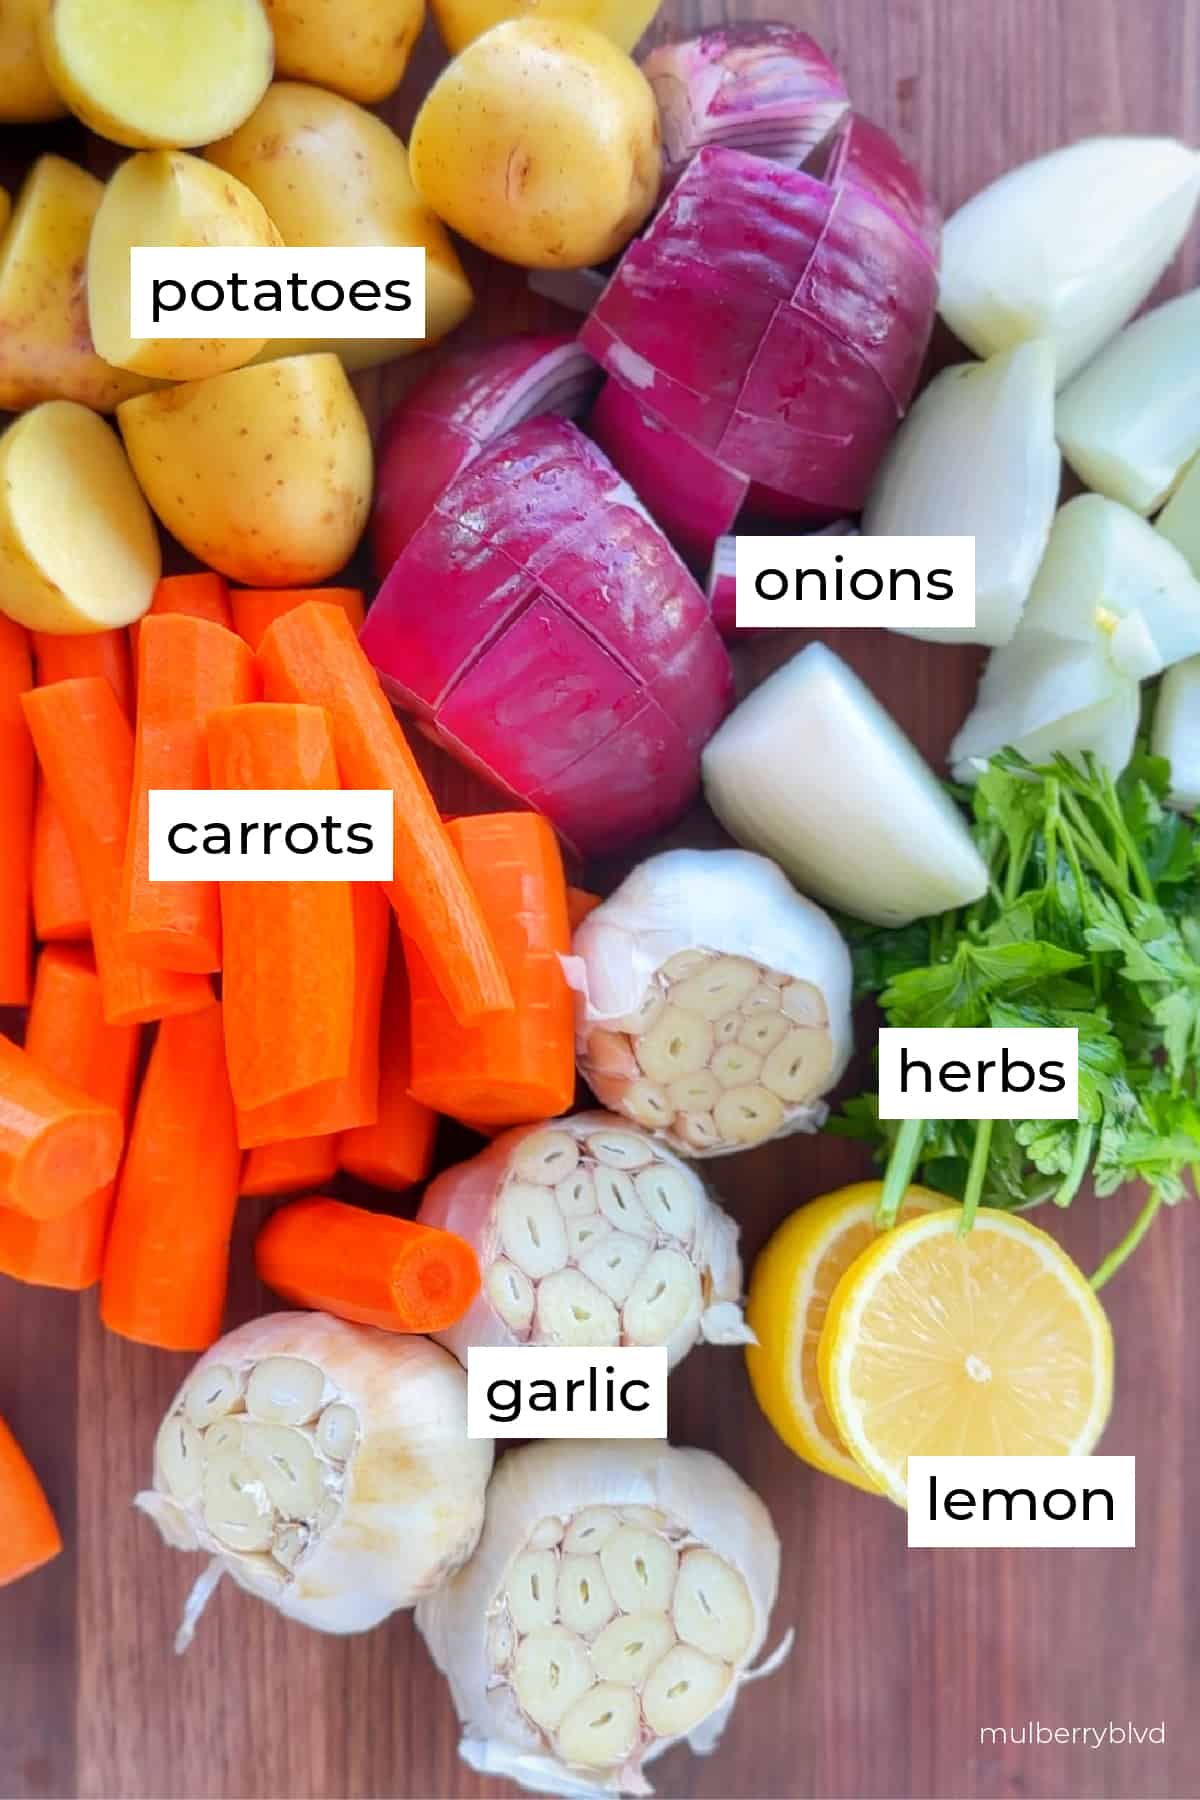 This is an image of cut and prepped garlic, lemon, herbs, carrots, potatoes, and both red and white onions.